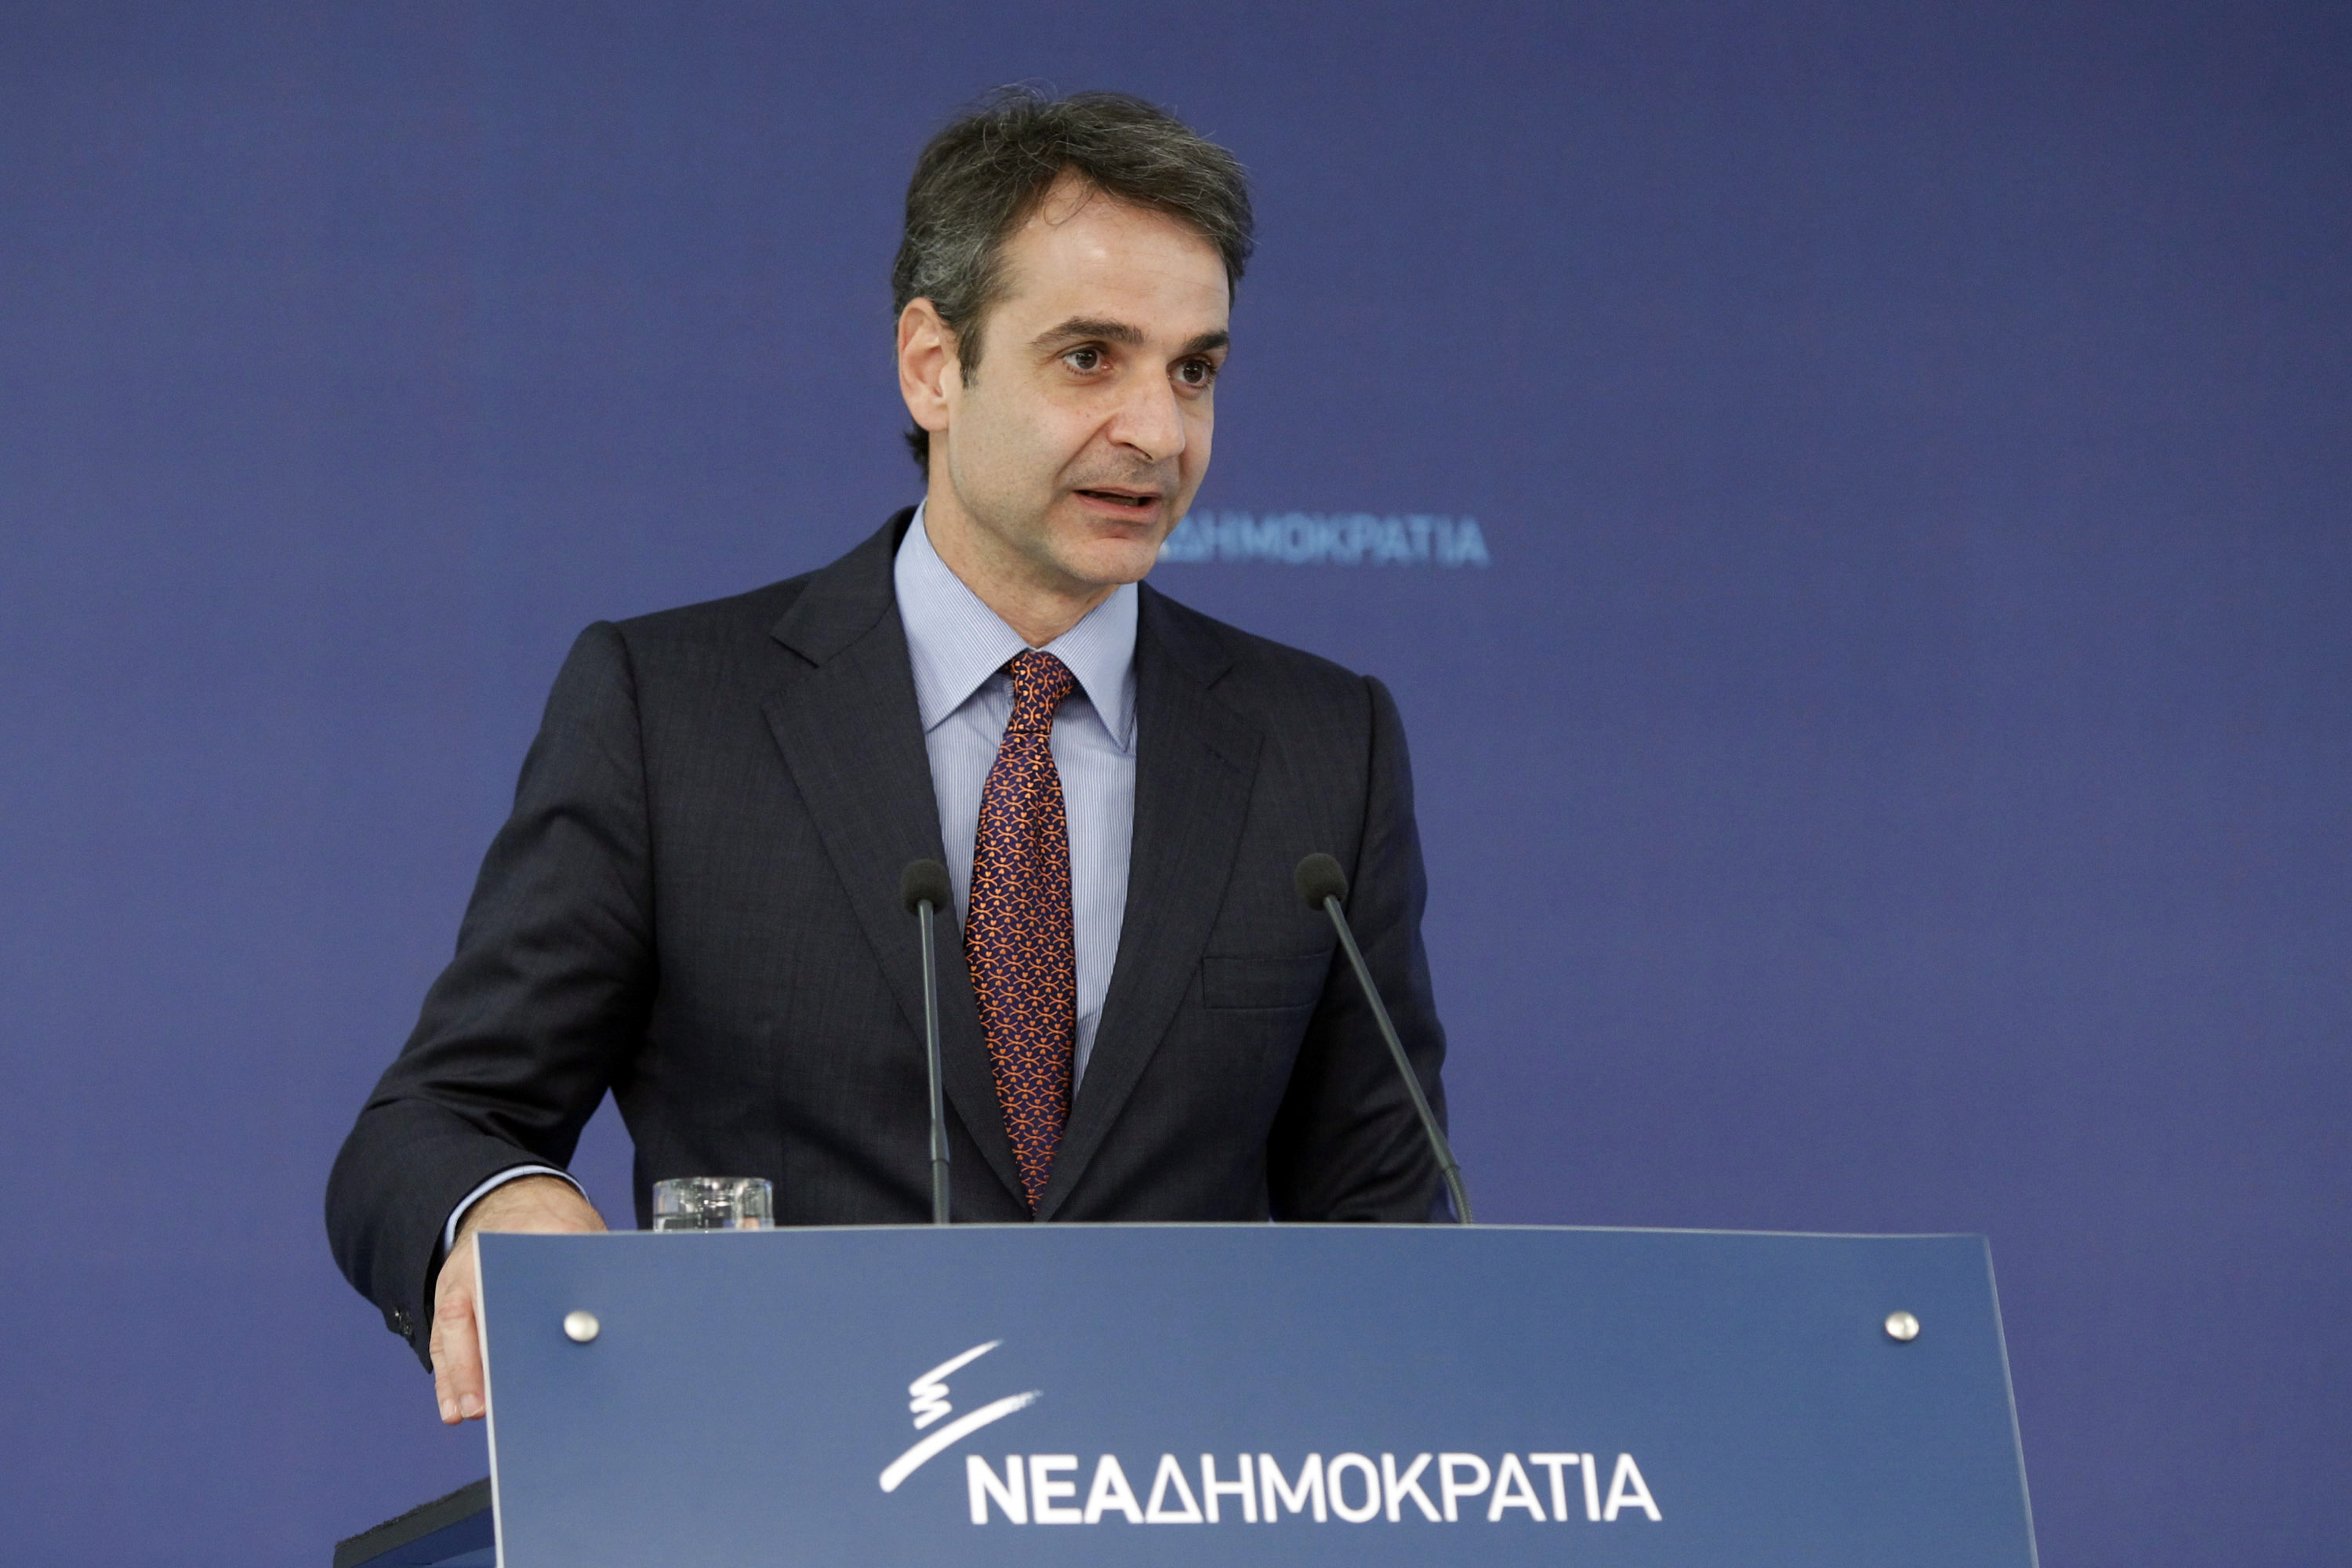 Mitsotakis: “Political reforms are necessary for Europe”